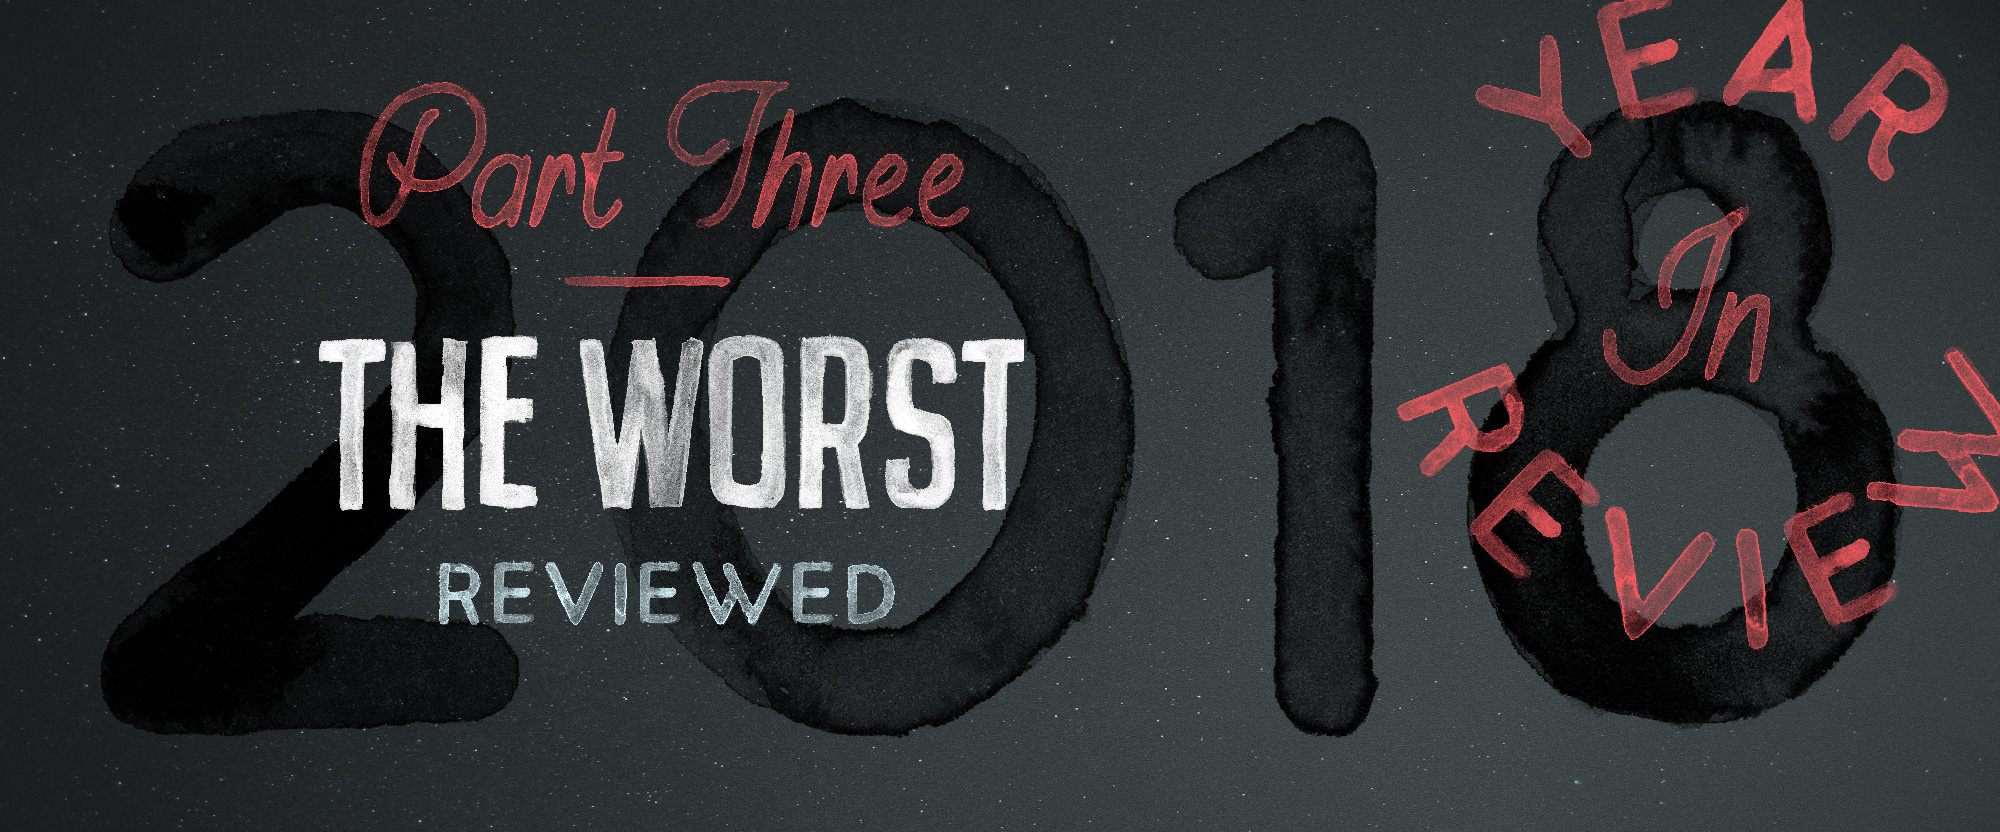 The Best and Worst Identities of 2018, Part 3: The Worst Reviewed